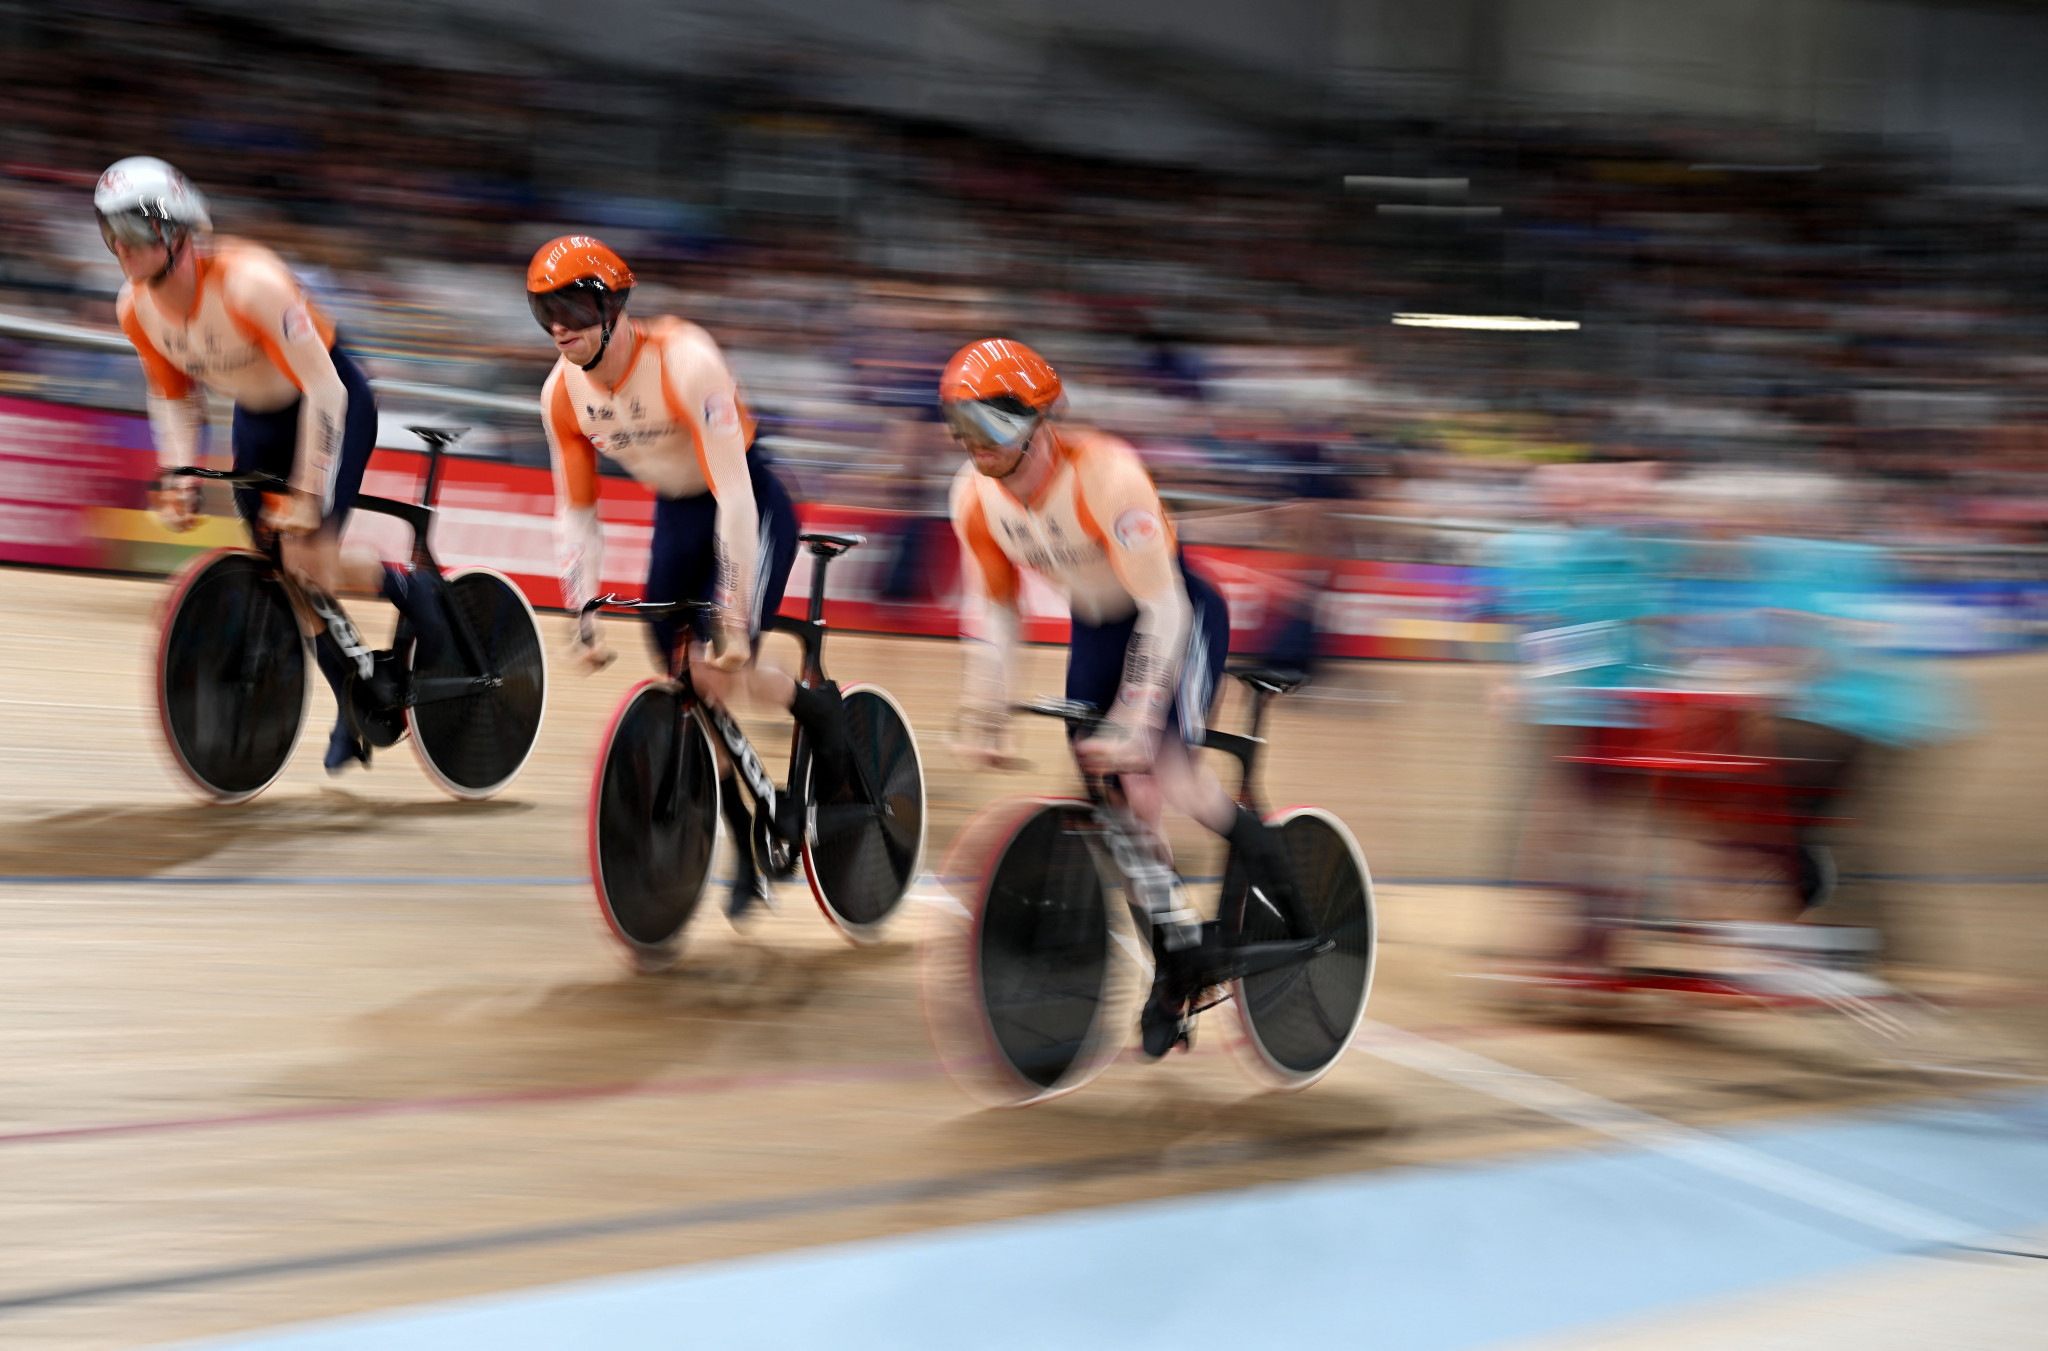 The Netherlands won the gold medal in the team sprint for the fifth time in the last six UCI Cycling World Championships ©Getty Images